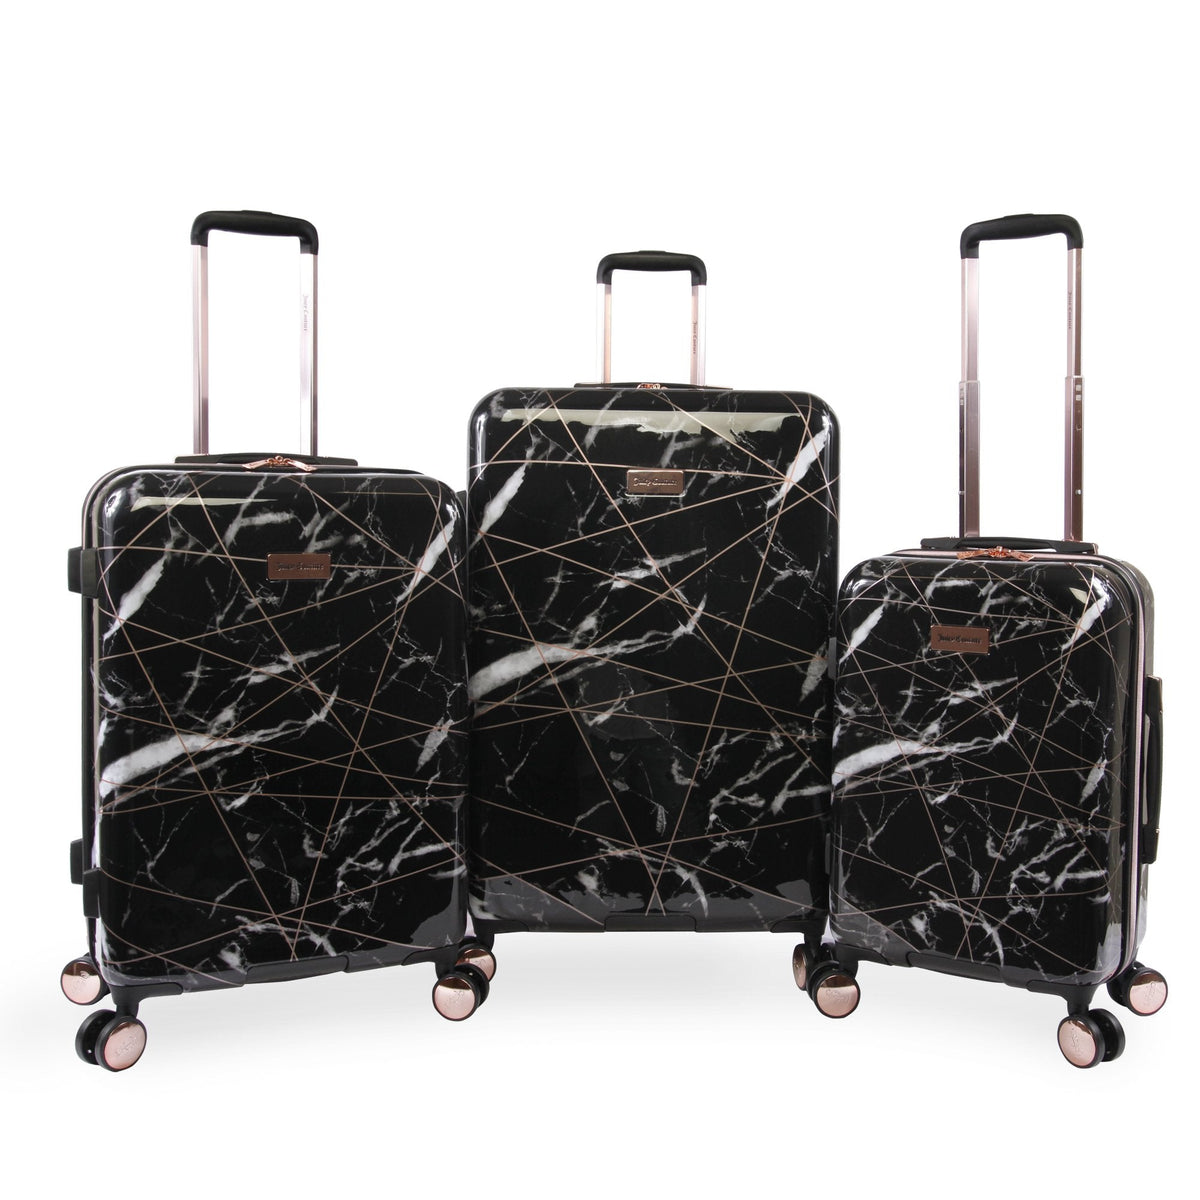 Juicy Couture 3-Piece Hardside Spinner Luggage Set Black Marble Web